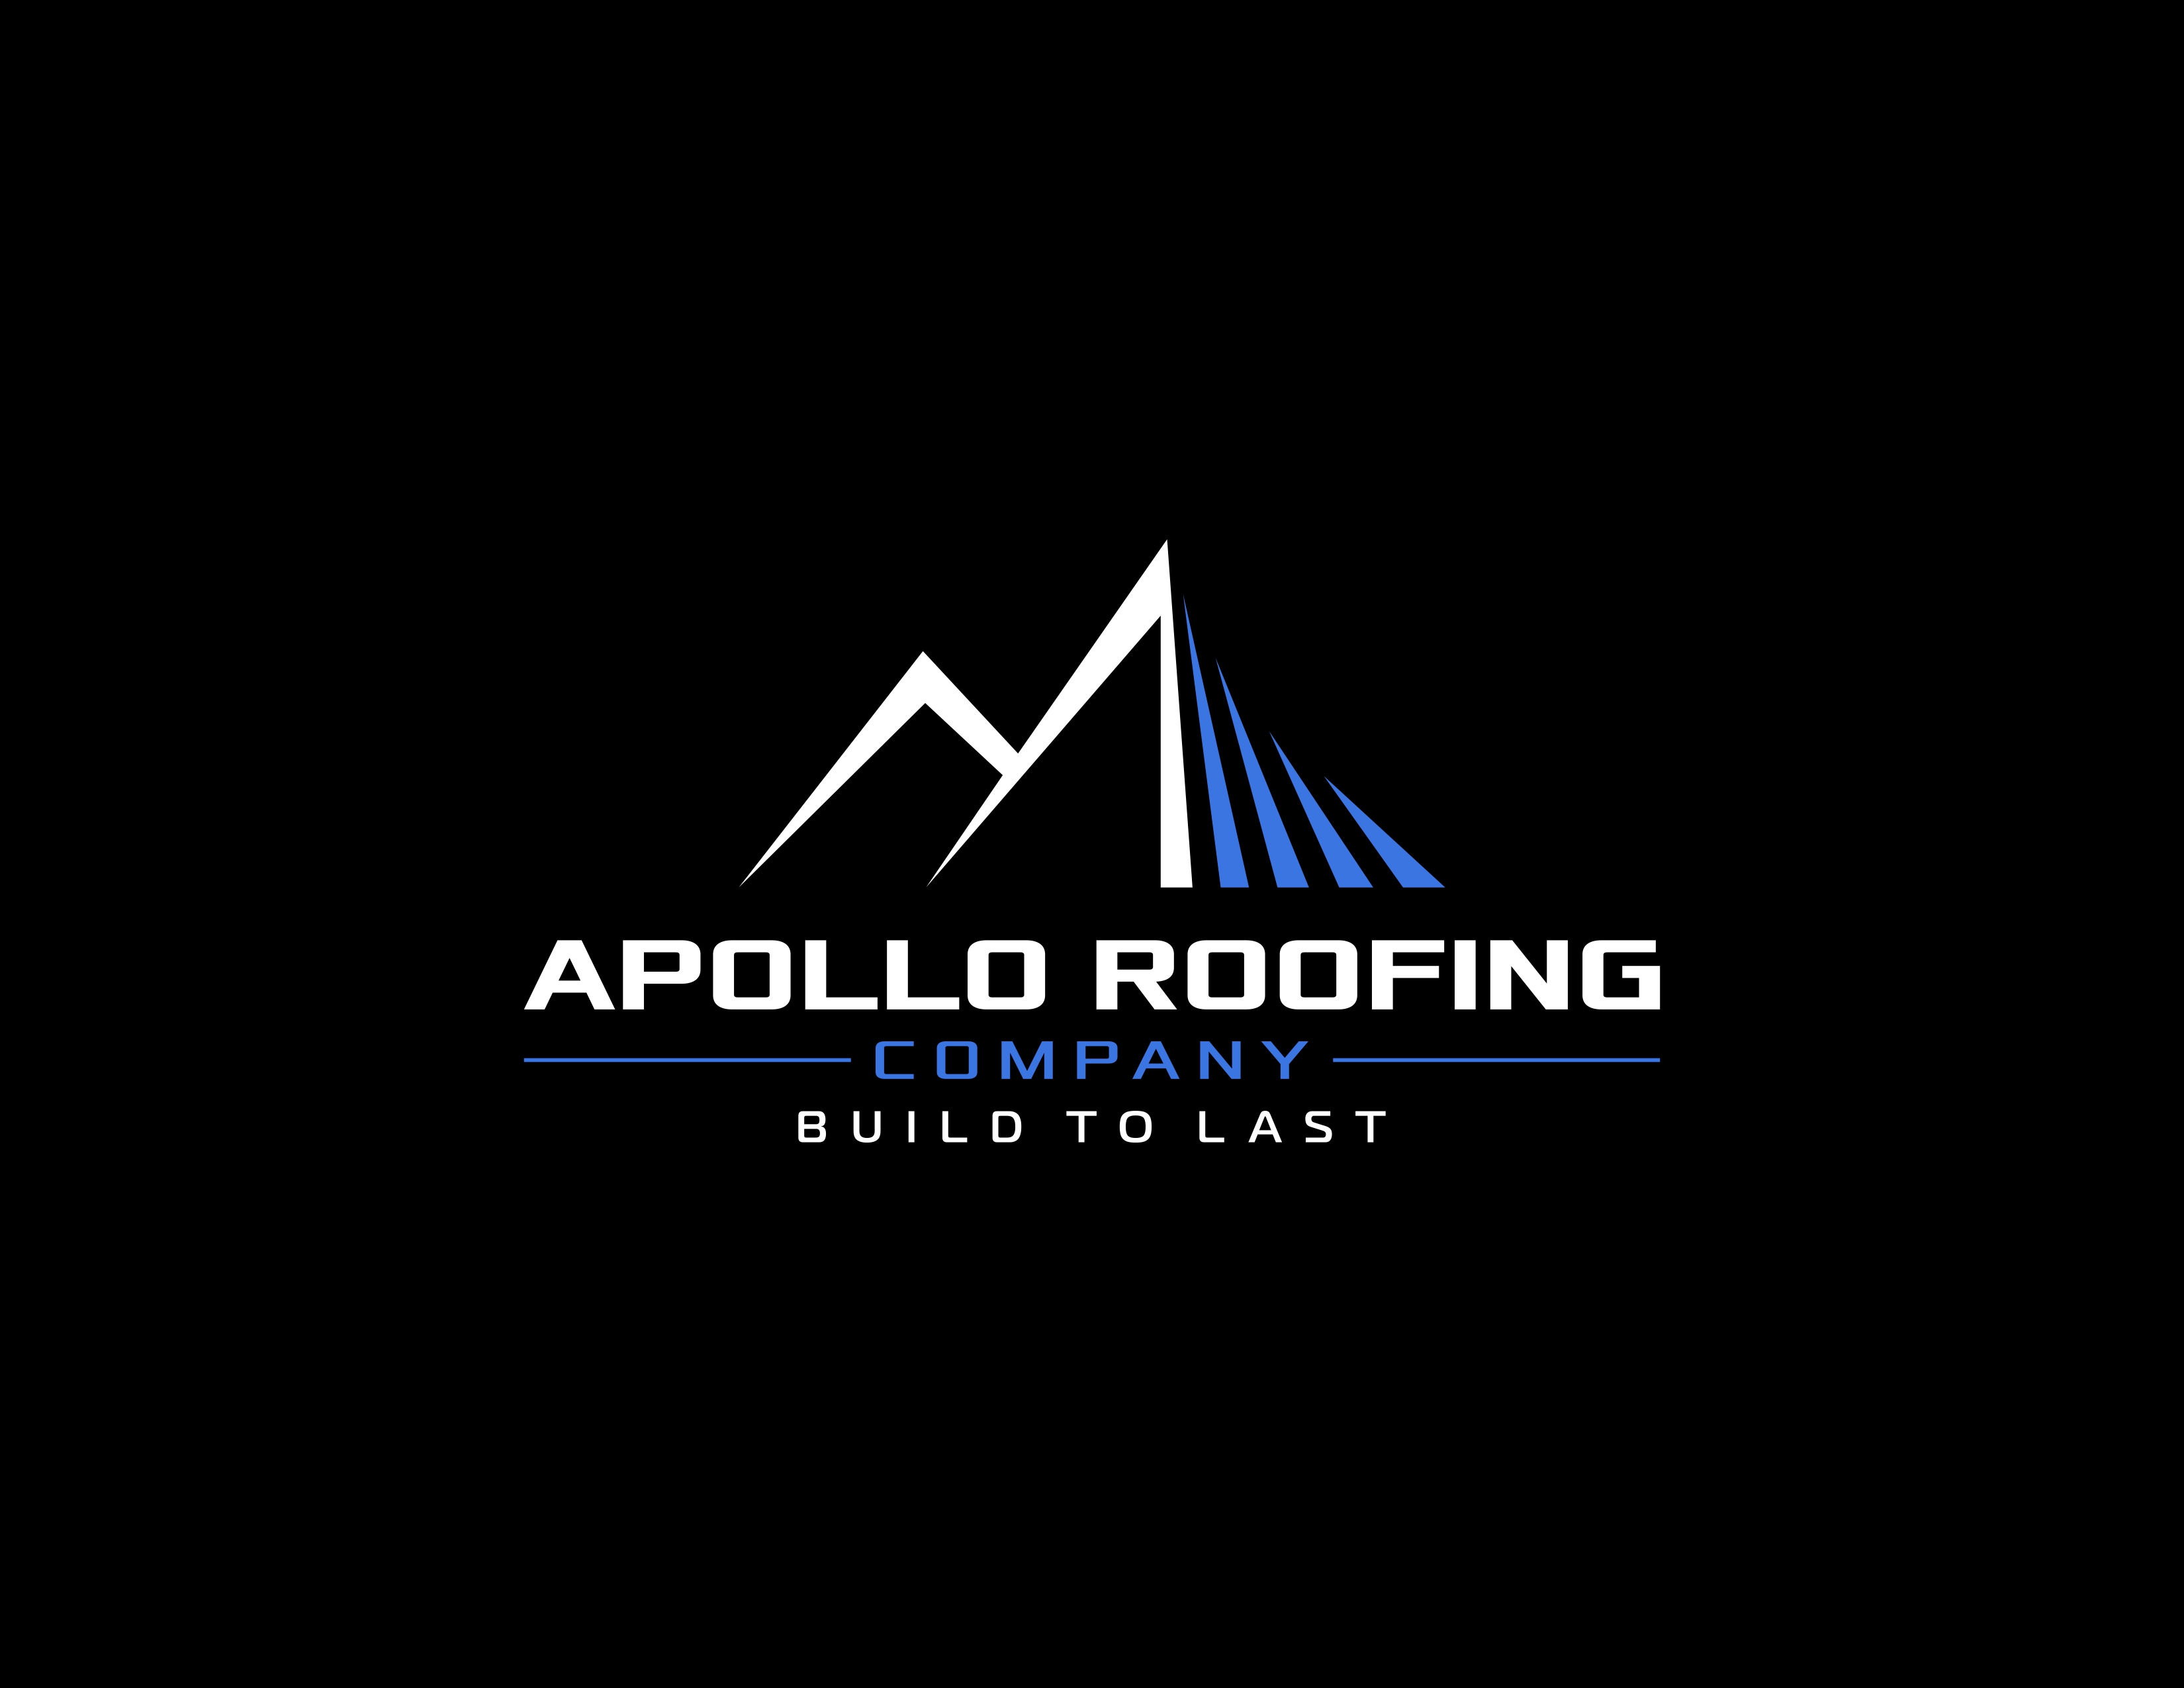 Apollo Roofing Company Outlines Its Stand as a The Best Roofing Company in Francisco